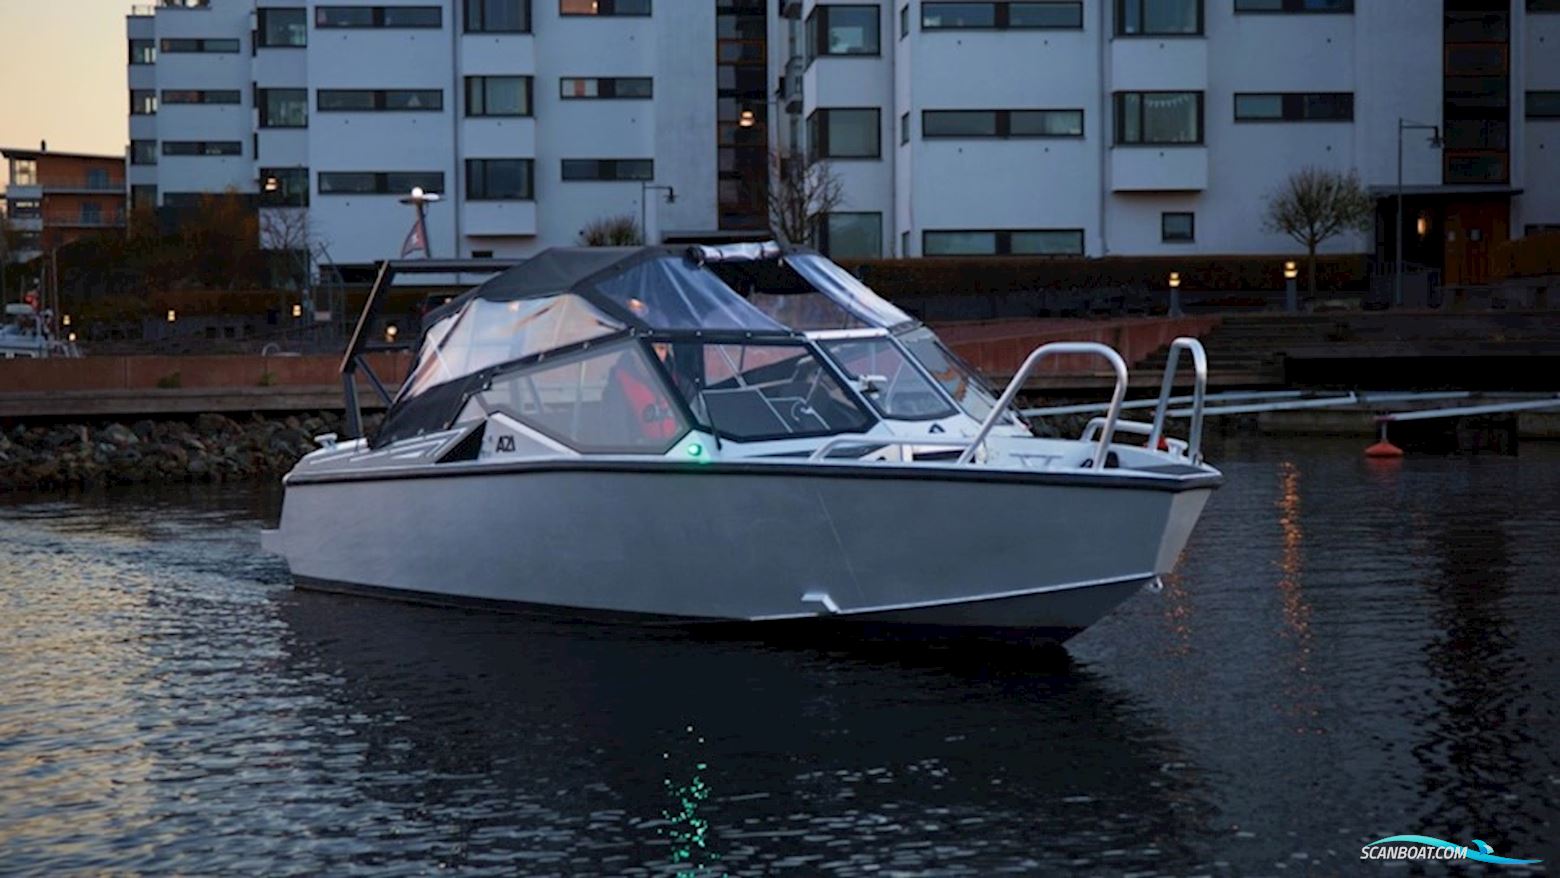 Anytec A21 Motor boat 2020, with Mercury F150 Exlpt Efi engine, Sweden